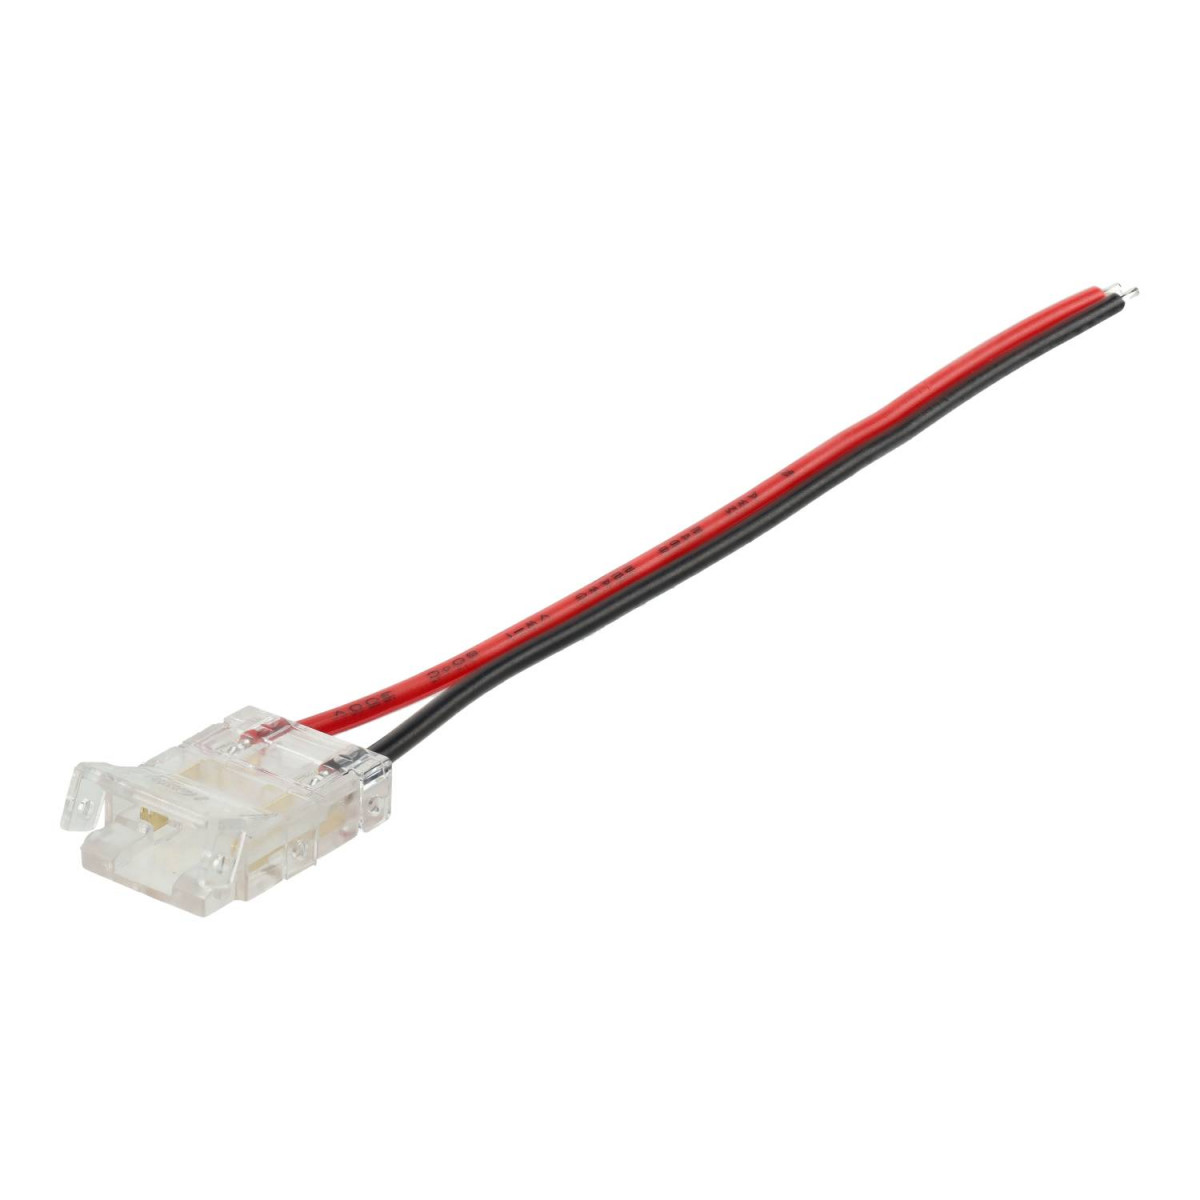 Connector Cable for COB LED Strip - 10mm